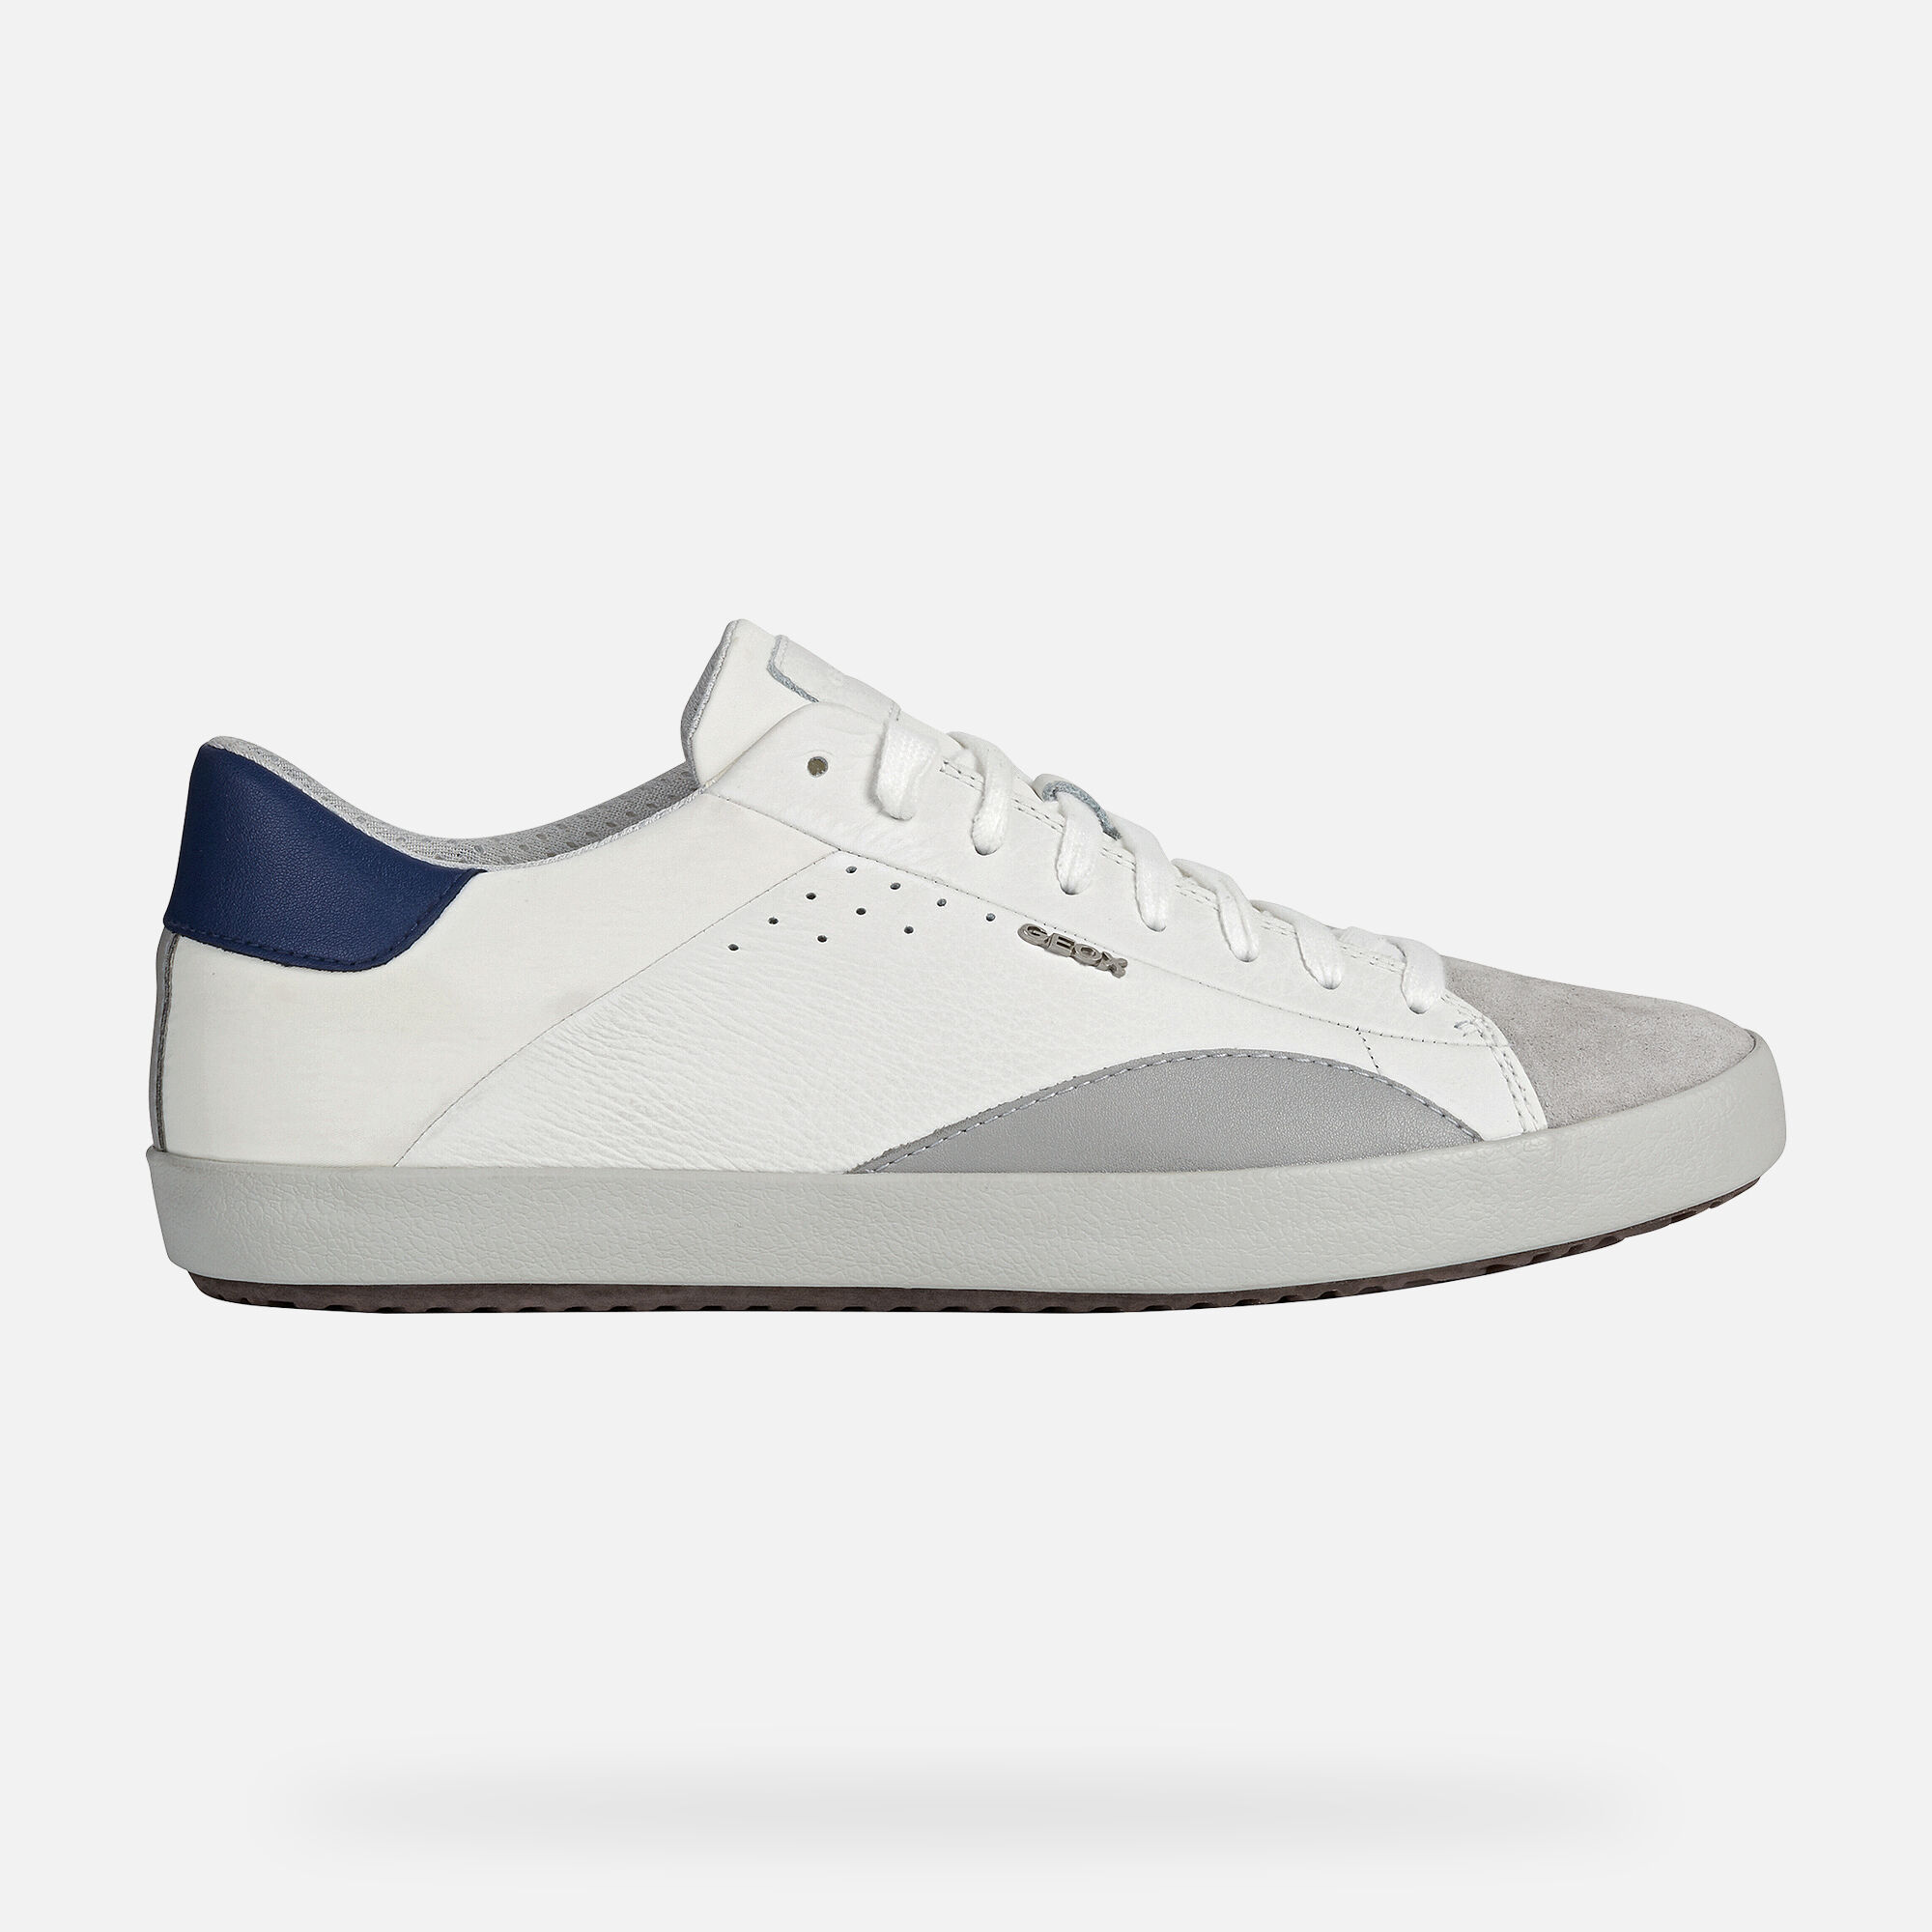 Geox WARLEY Man: White Sneakers | Geox® Online Official Store